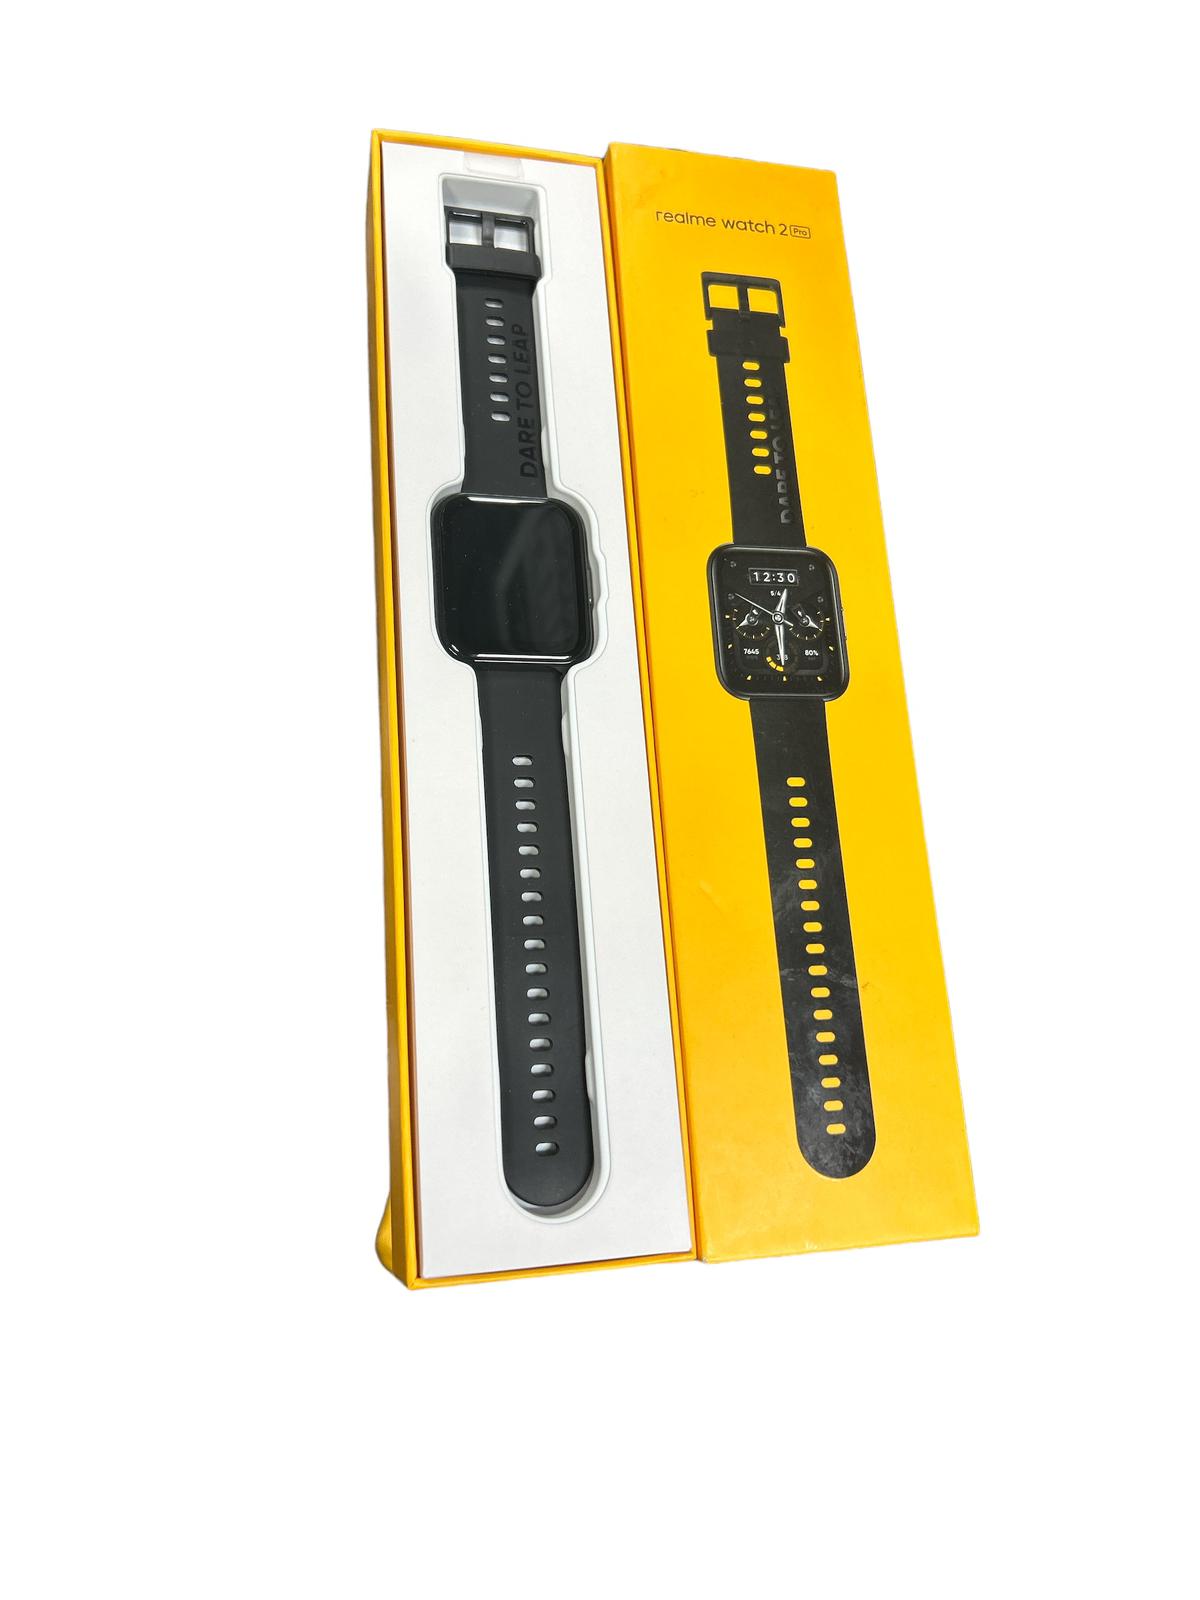 Real Me Watch 2 Pro - Boxed 3